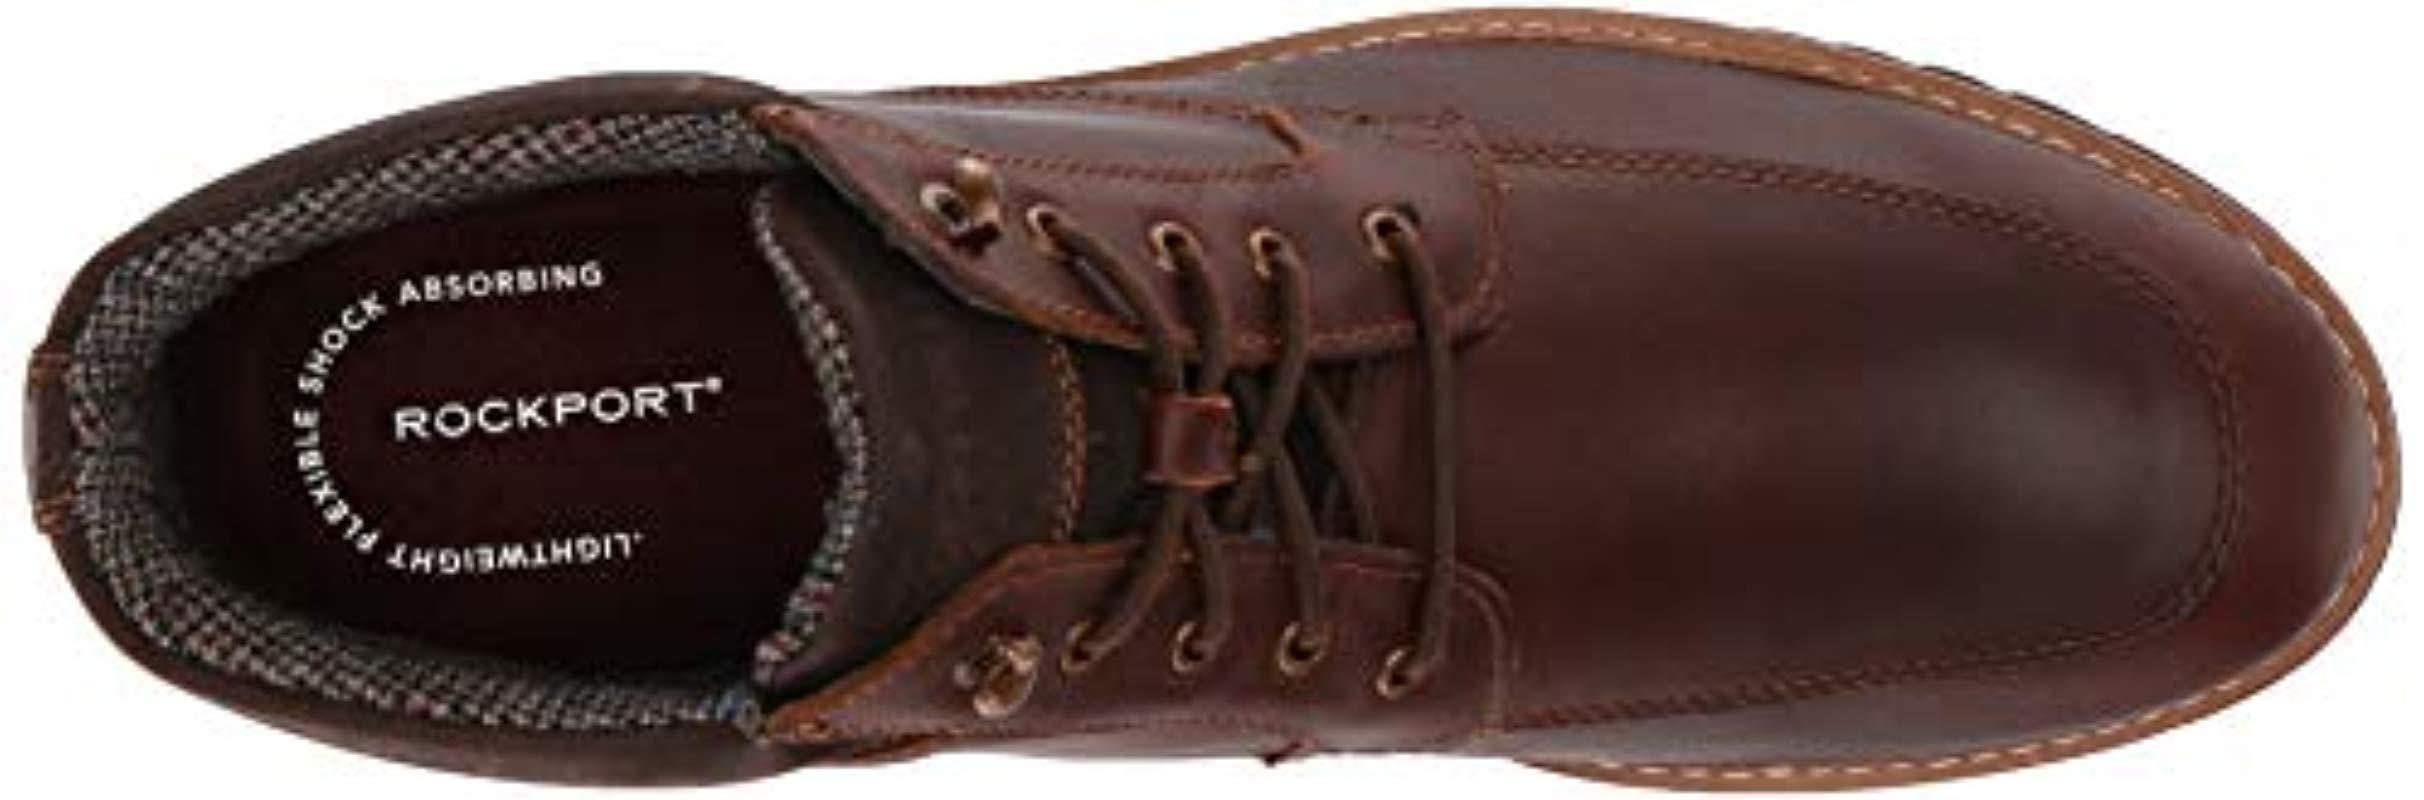 rockport marshall rugged leather ankle boots